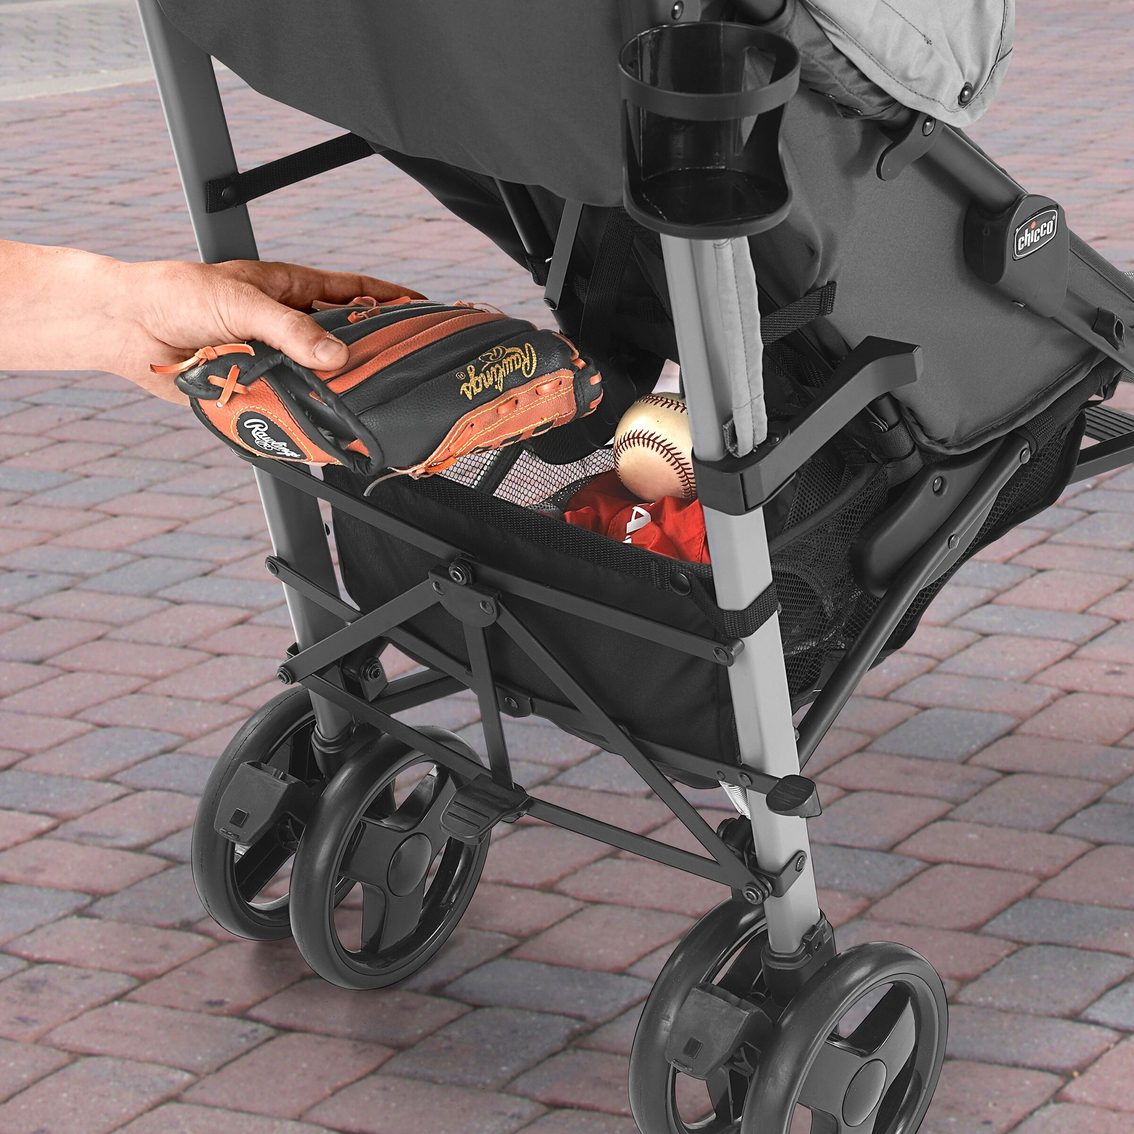 Chicco Liteway Stroller - Image 4 of 5